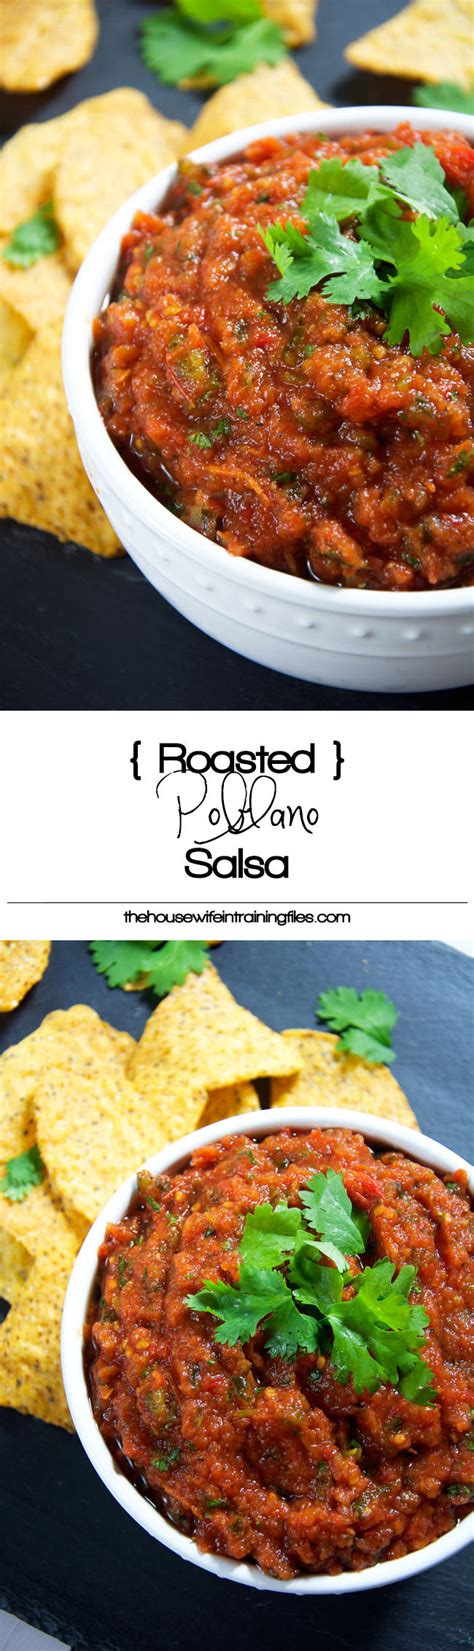 roasted-poblano-salsa-with-salt-and-wit image